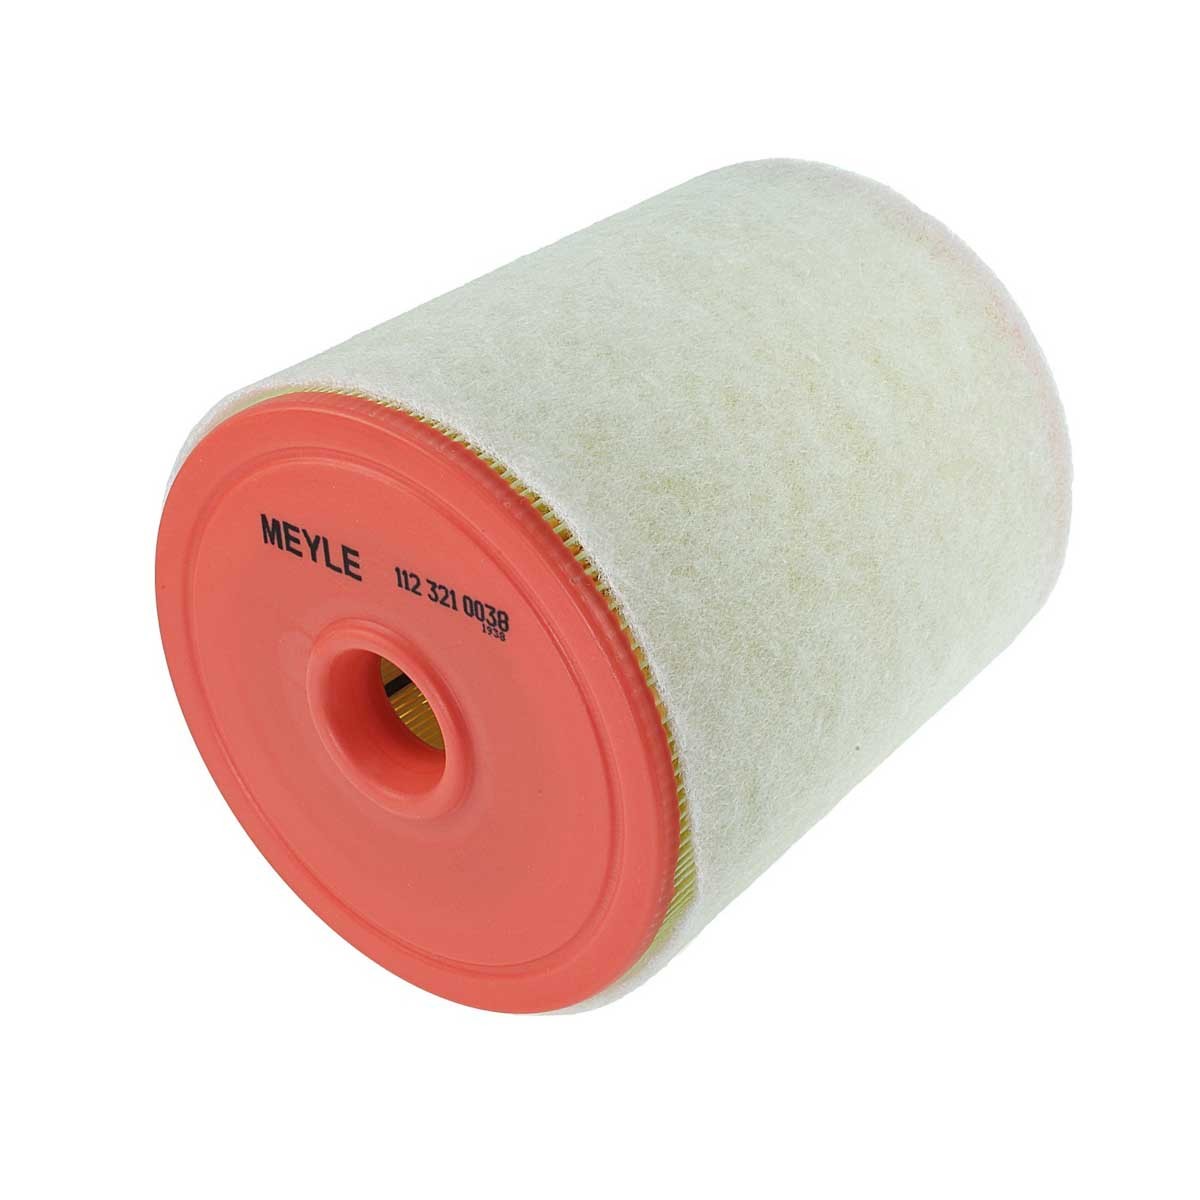 MAF0700 MEYLE 187mm, 158mm, Filter Insert, with pre-filter Height: 187mm Engine air filter 112 321 0038 buy